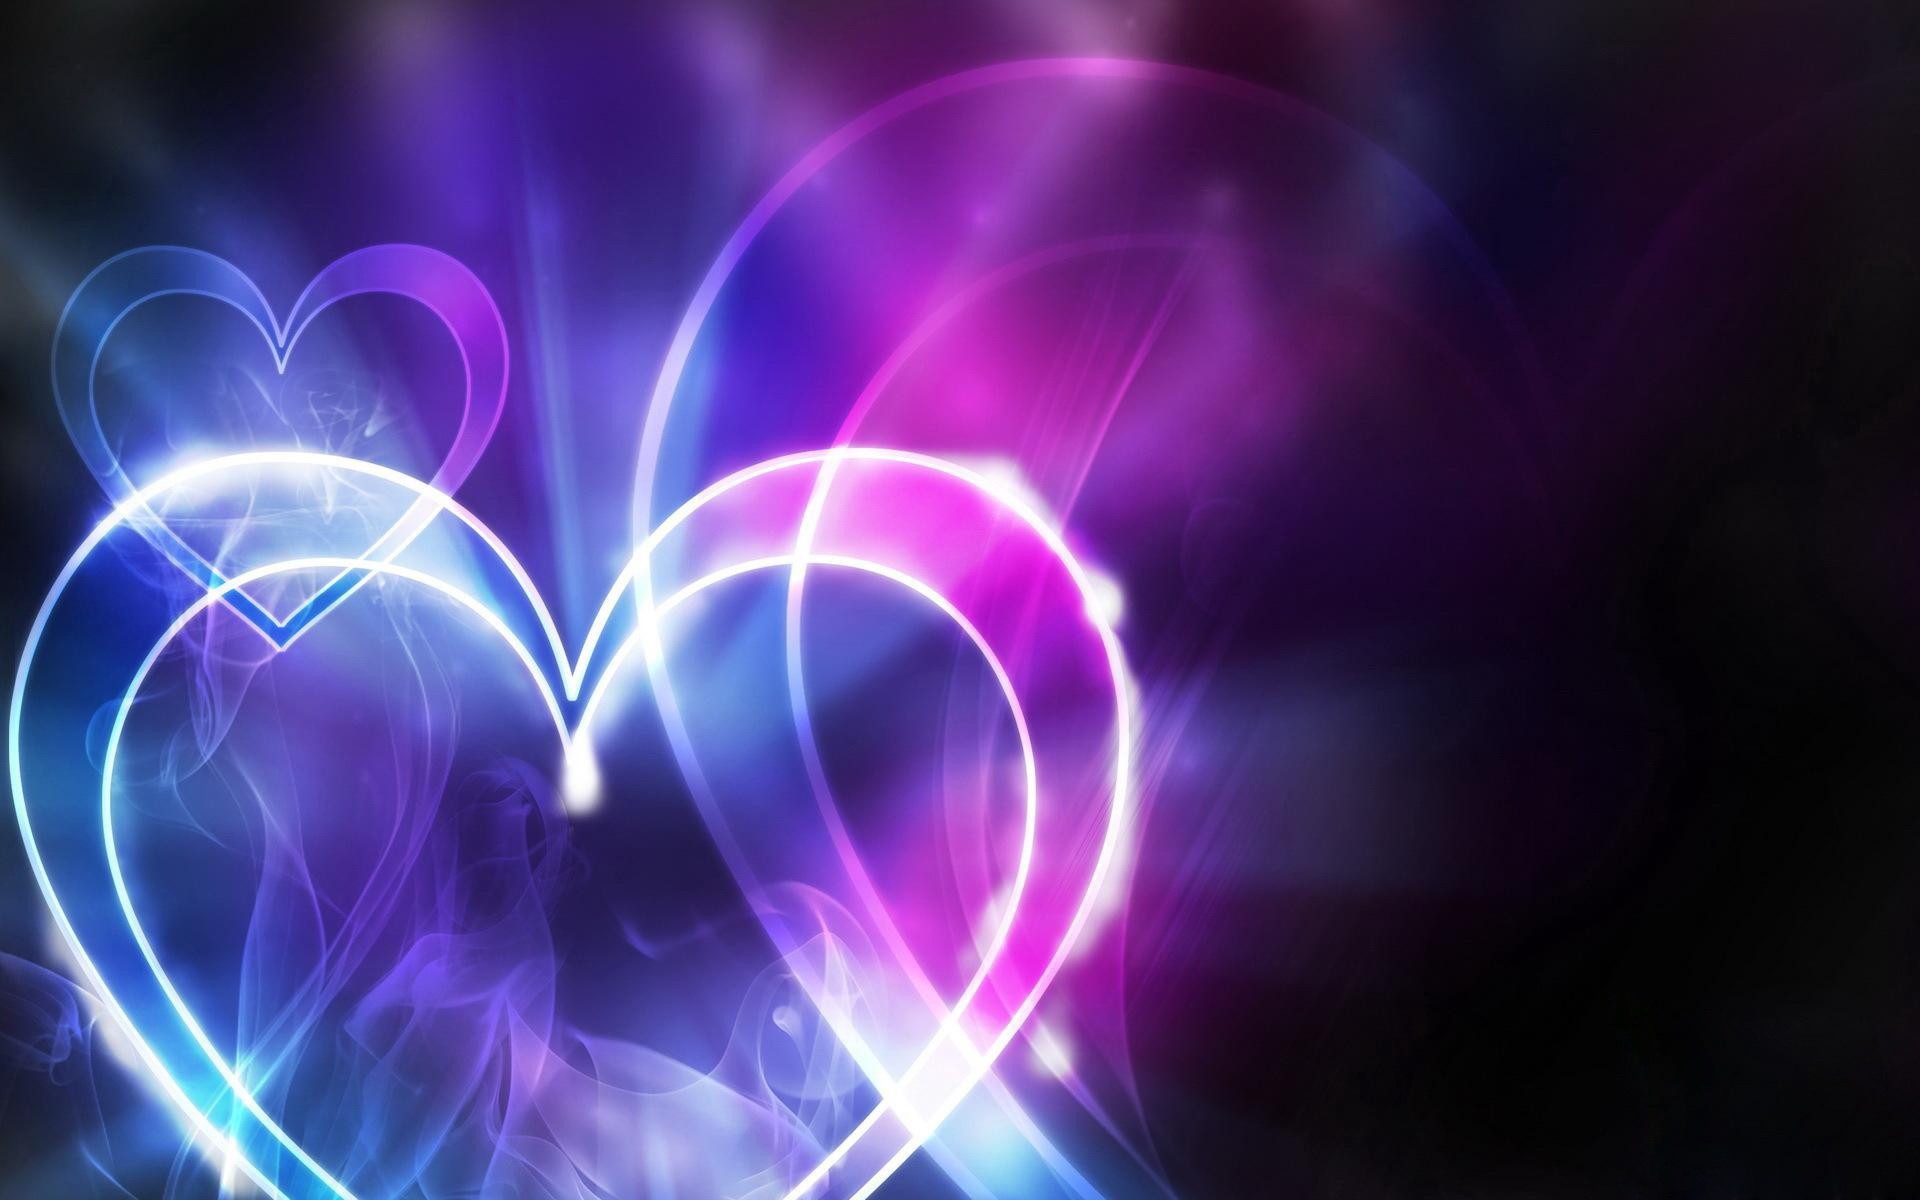 The theme of love, creative heart-shaped HD wallpapers #8 - 1920x1200